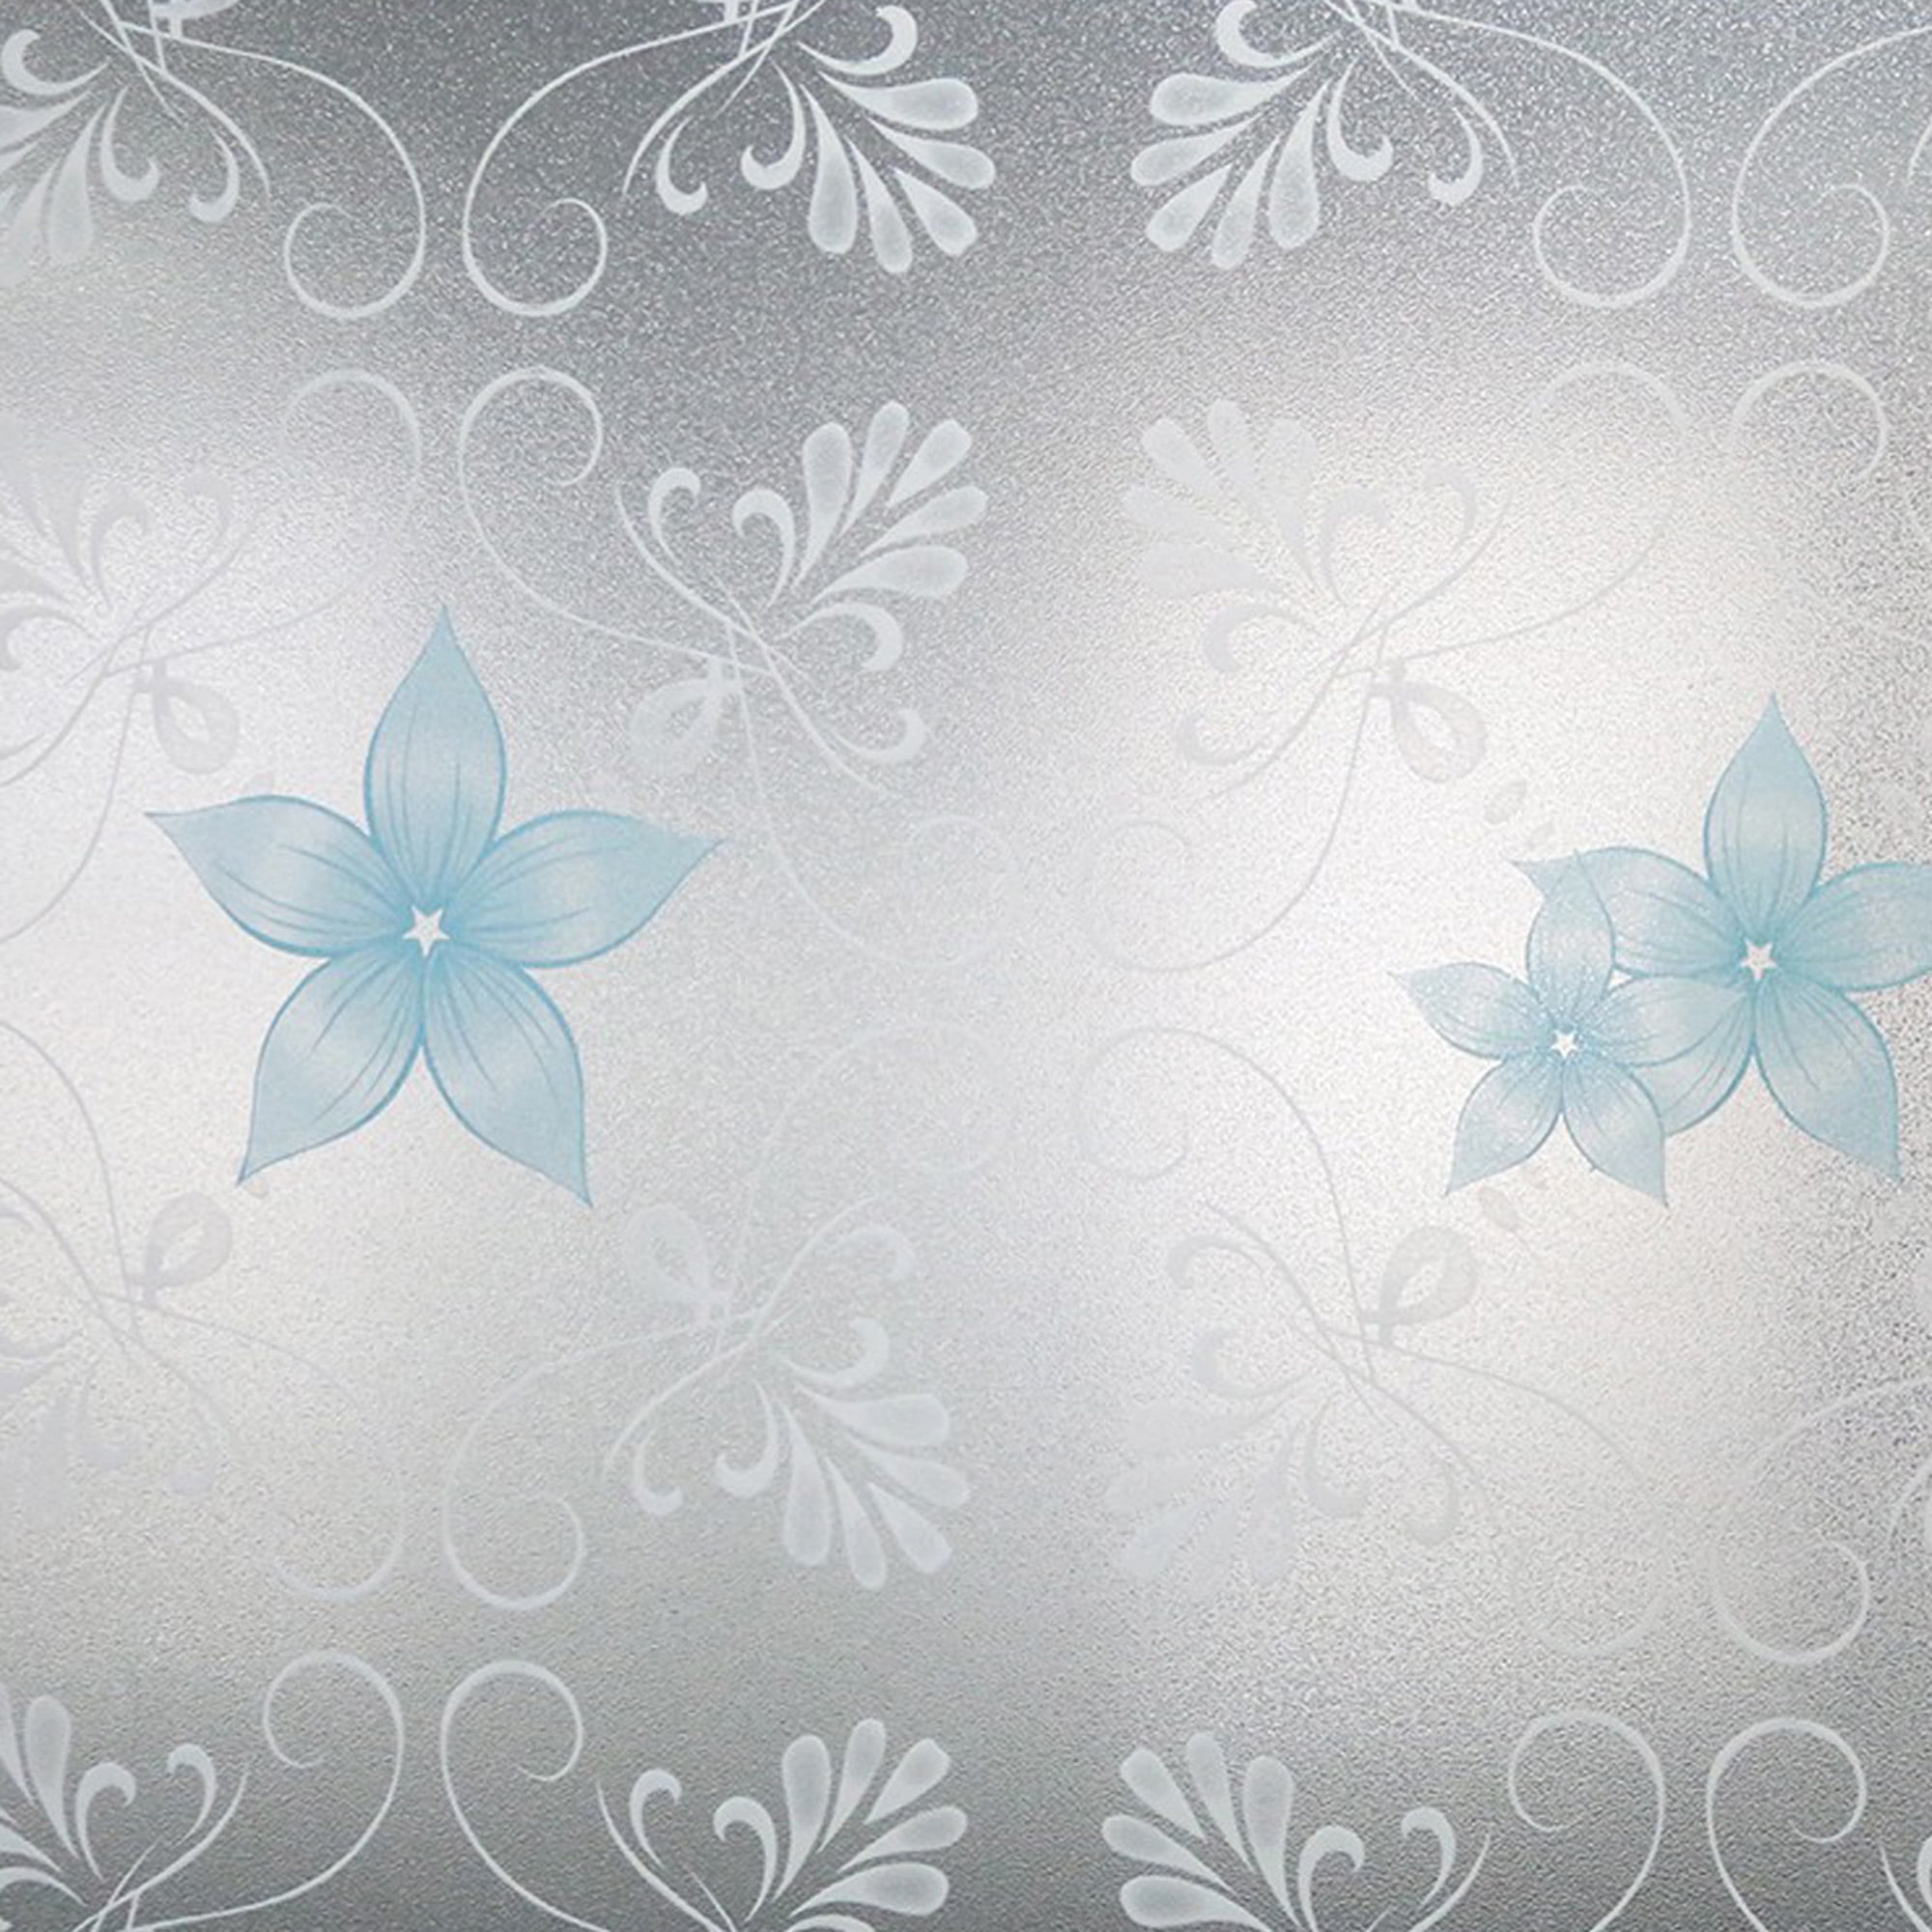 Iron Privacy Decor Stickers Wrought Flower Black&white Glass Stickers 